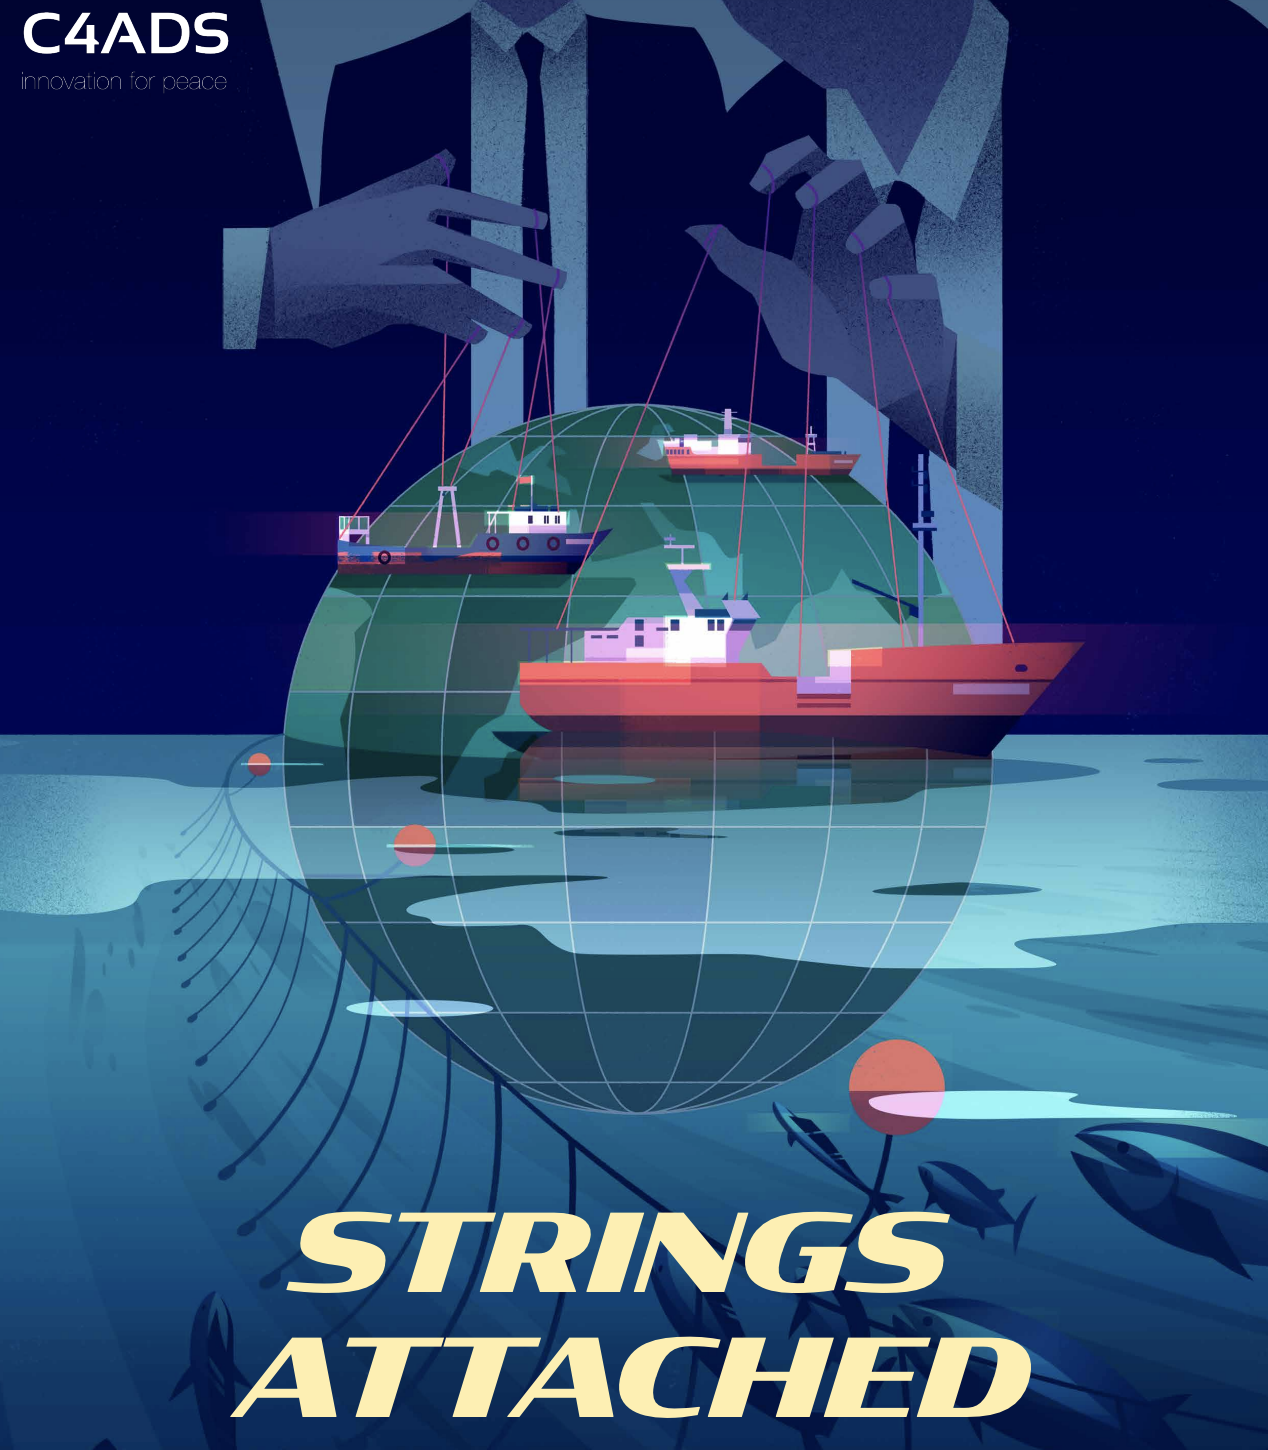 Strings Attached: Exploring onshore networks behind illegal, unreported, and unregulated fishing